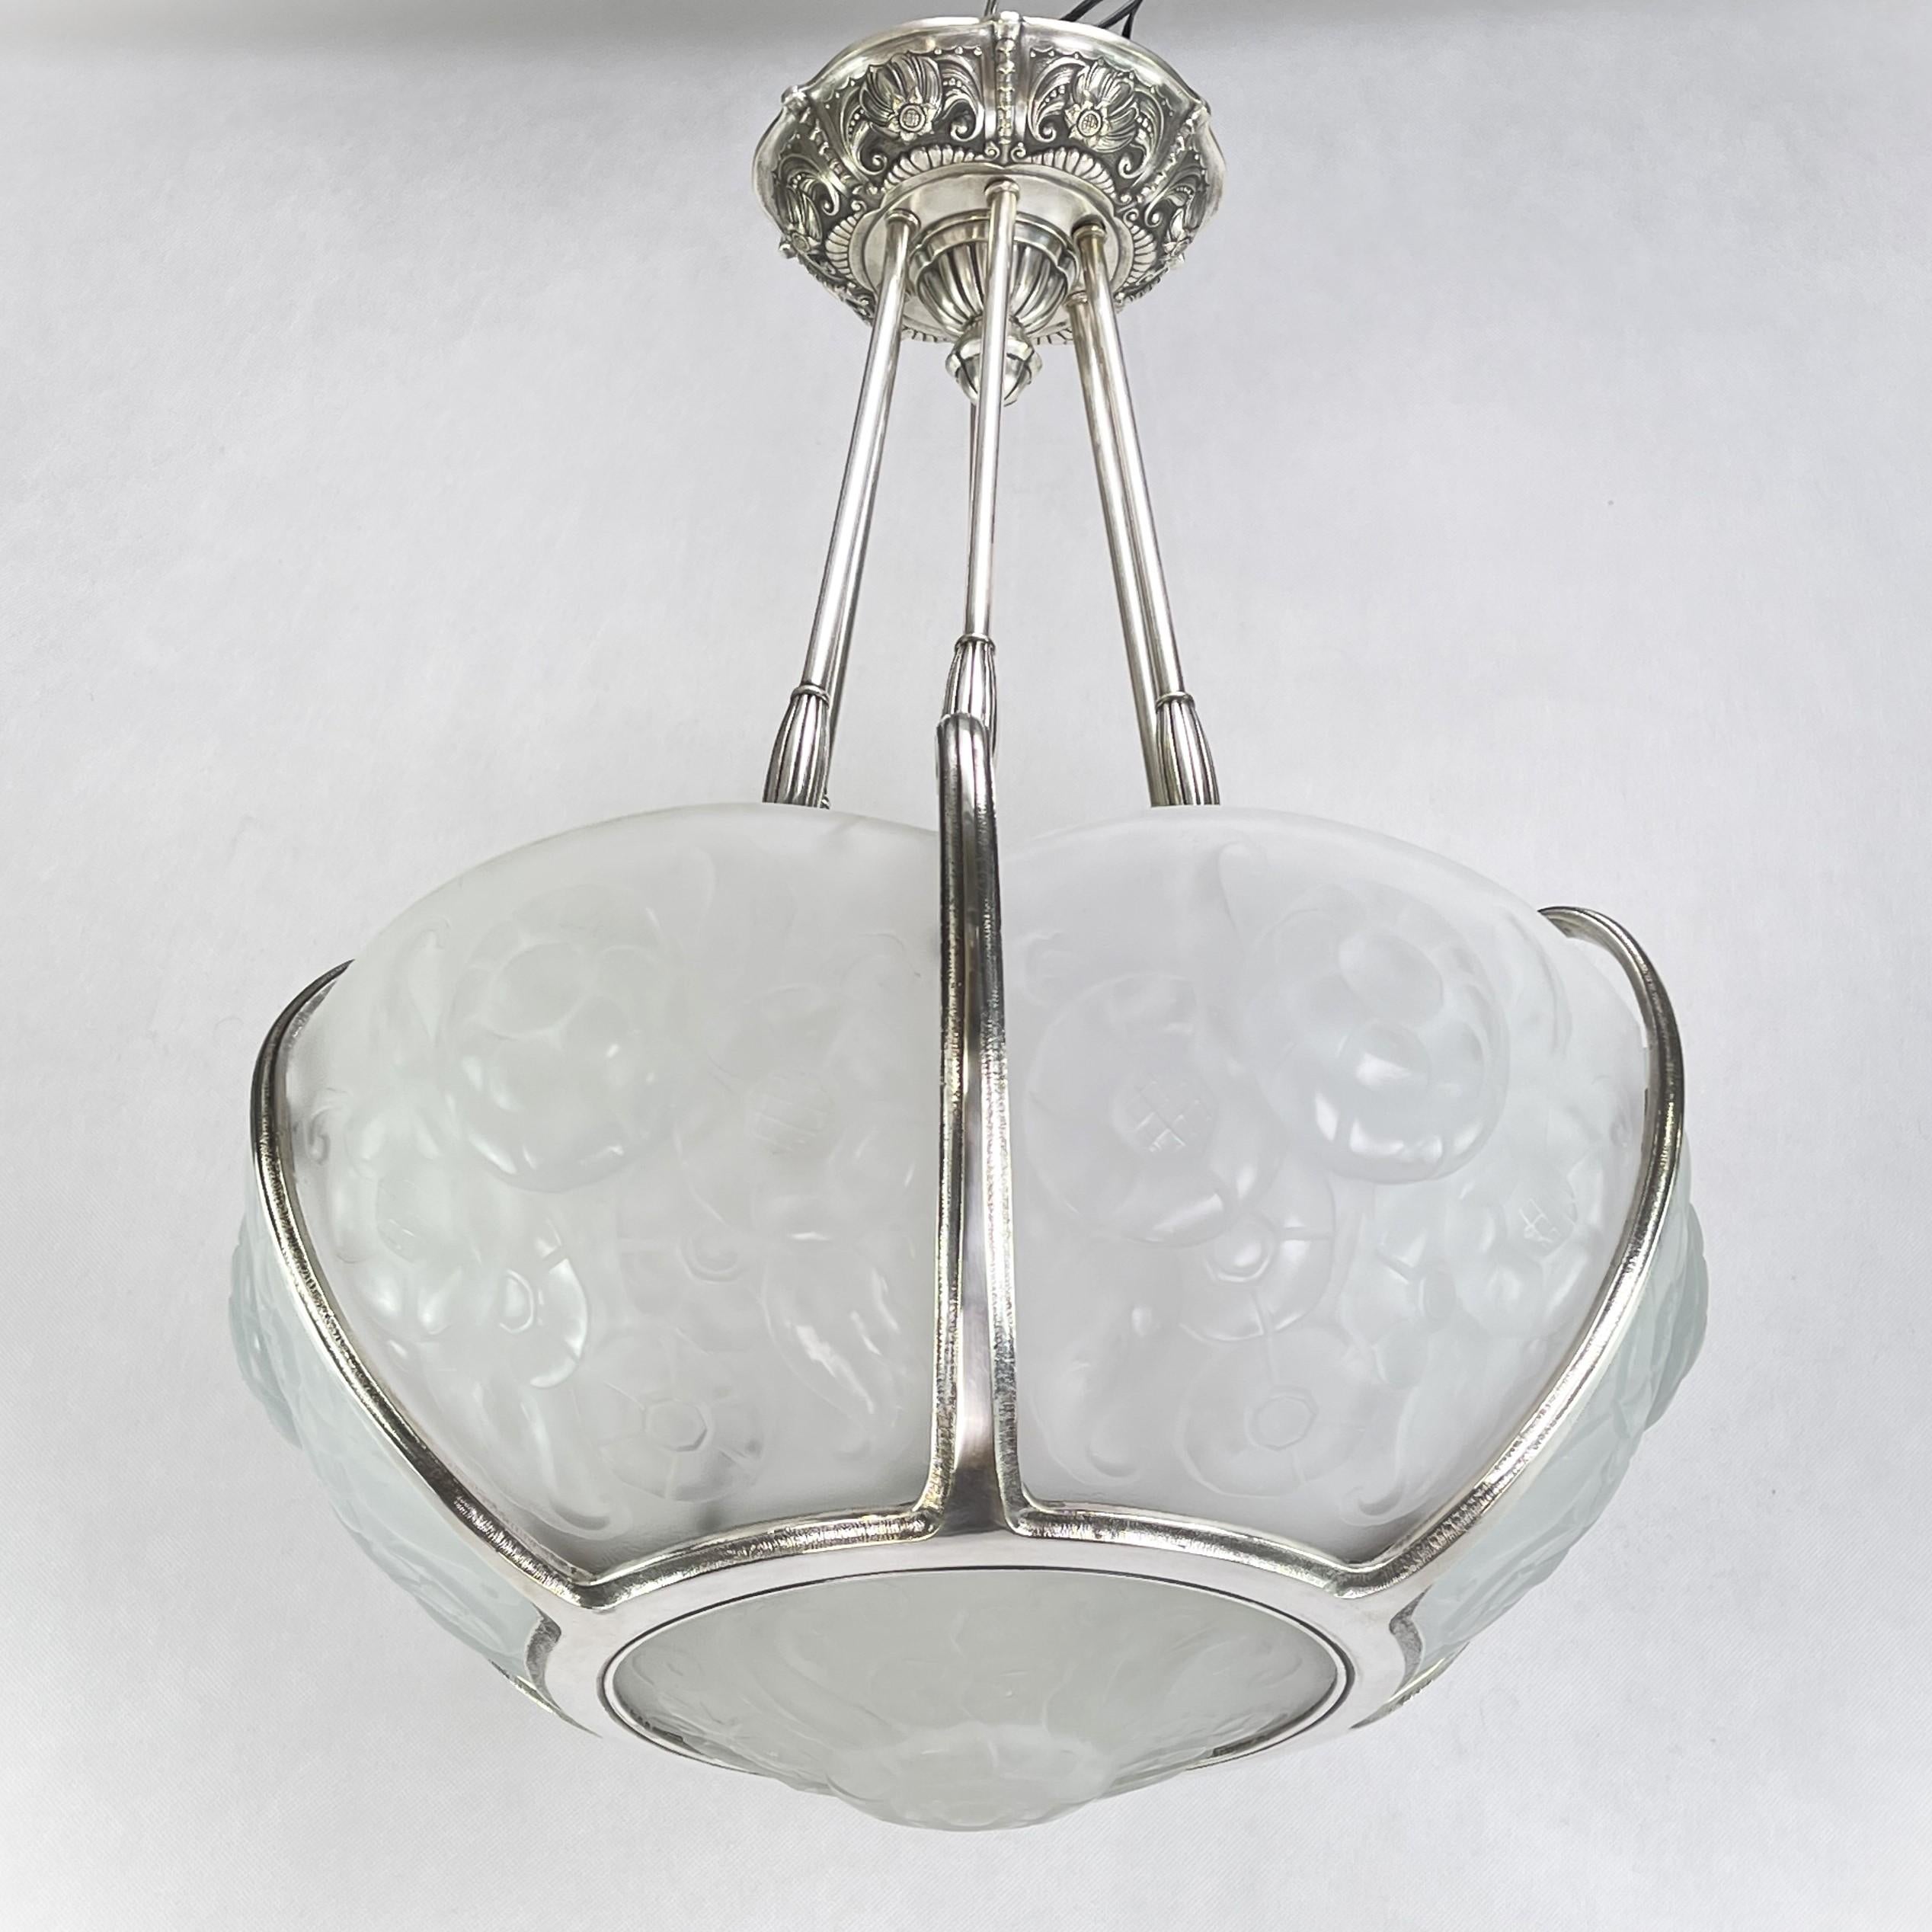 Art Deco chandelier by Muller Fréres - 1920s/1930s.

This original pendant lamp captivates with its simple and matter-of-fact Art Deco design. The heavy lamp glas is signed and gives a very pleasant light. This ceiling lamp is an absolute design